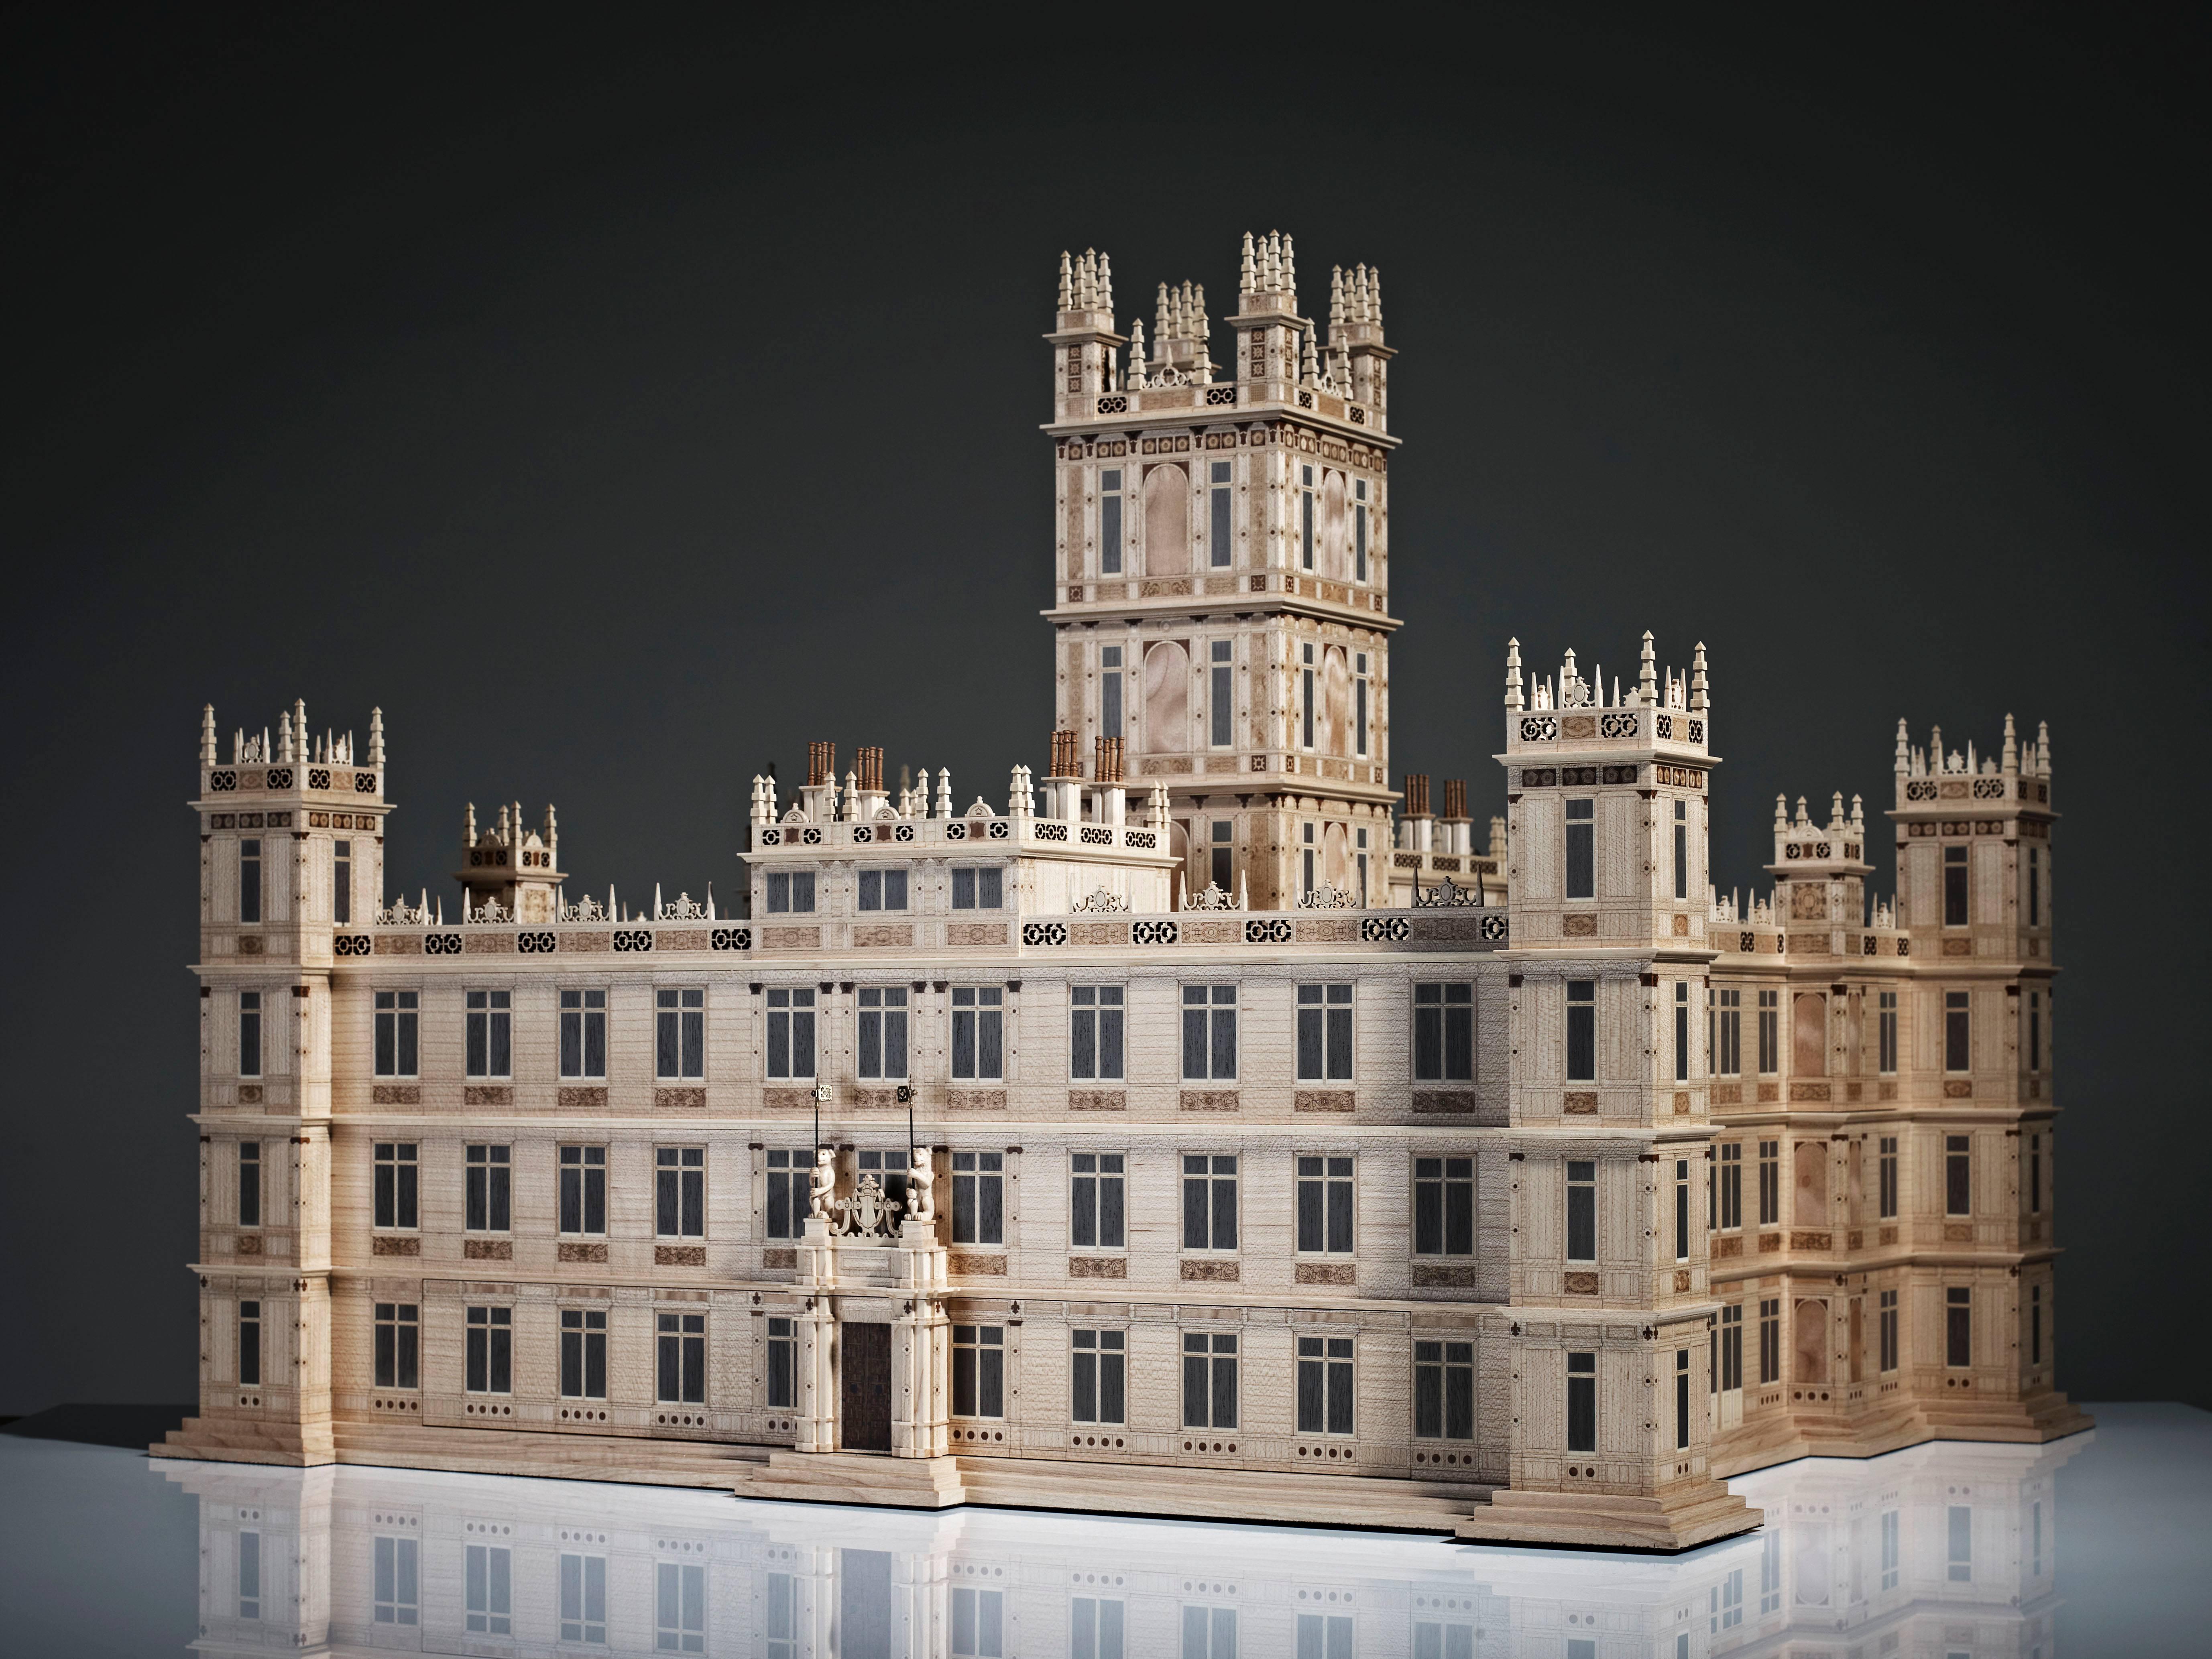 Over the years, British design company Linley has
developed expertise in creating scaled versions of famous
architectural buildings including the Metropolitan Museum
of Art, the Royal Albert Hall and the Royal Opera House.
In this instance,